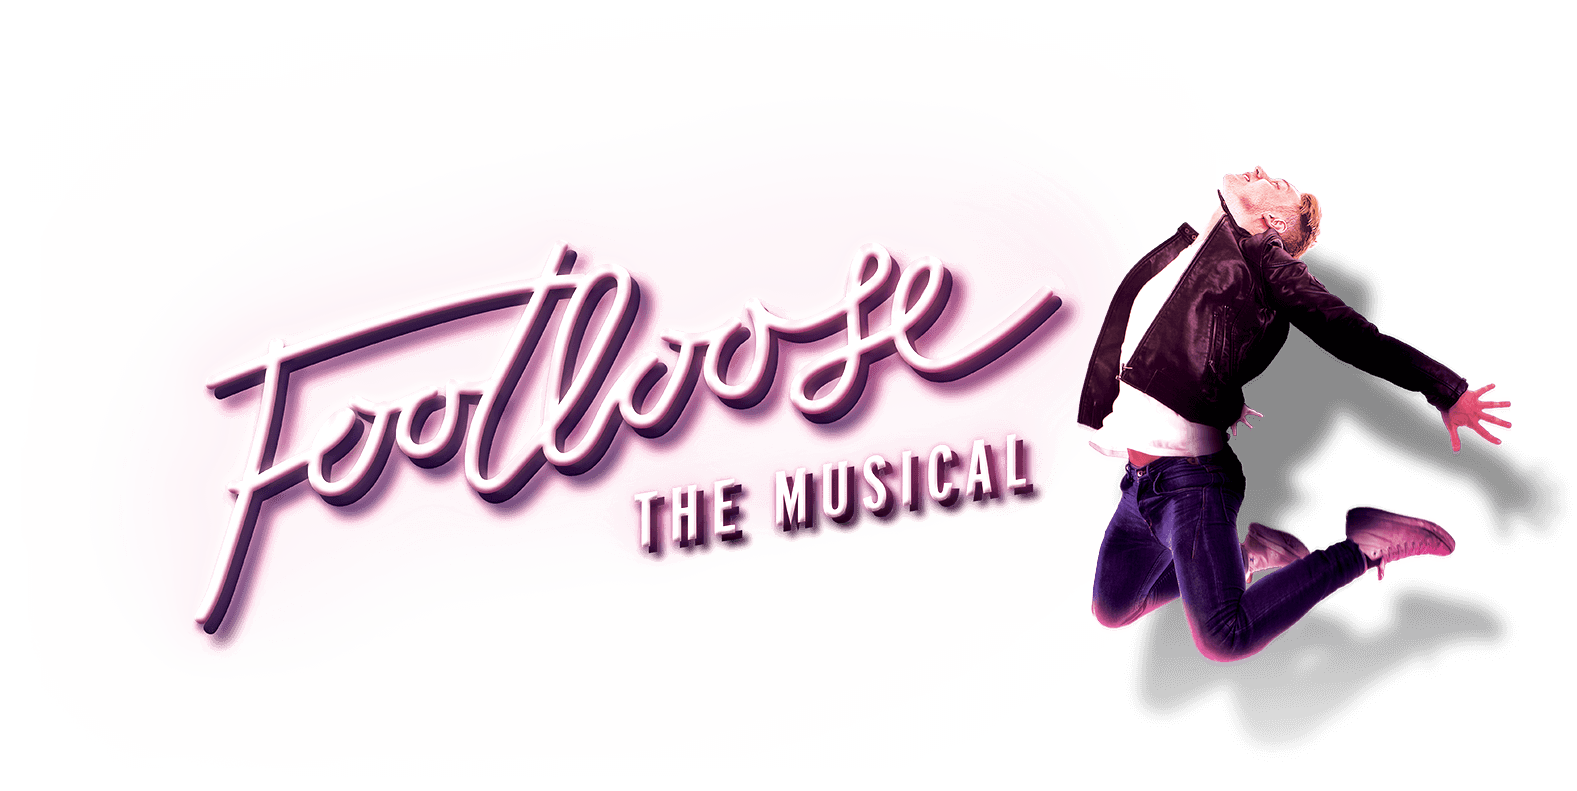 FOOTLOOSE - The Legendary 80's Musical